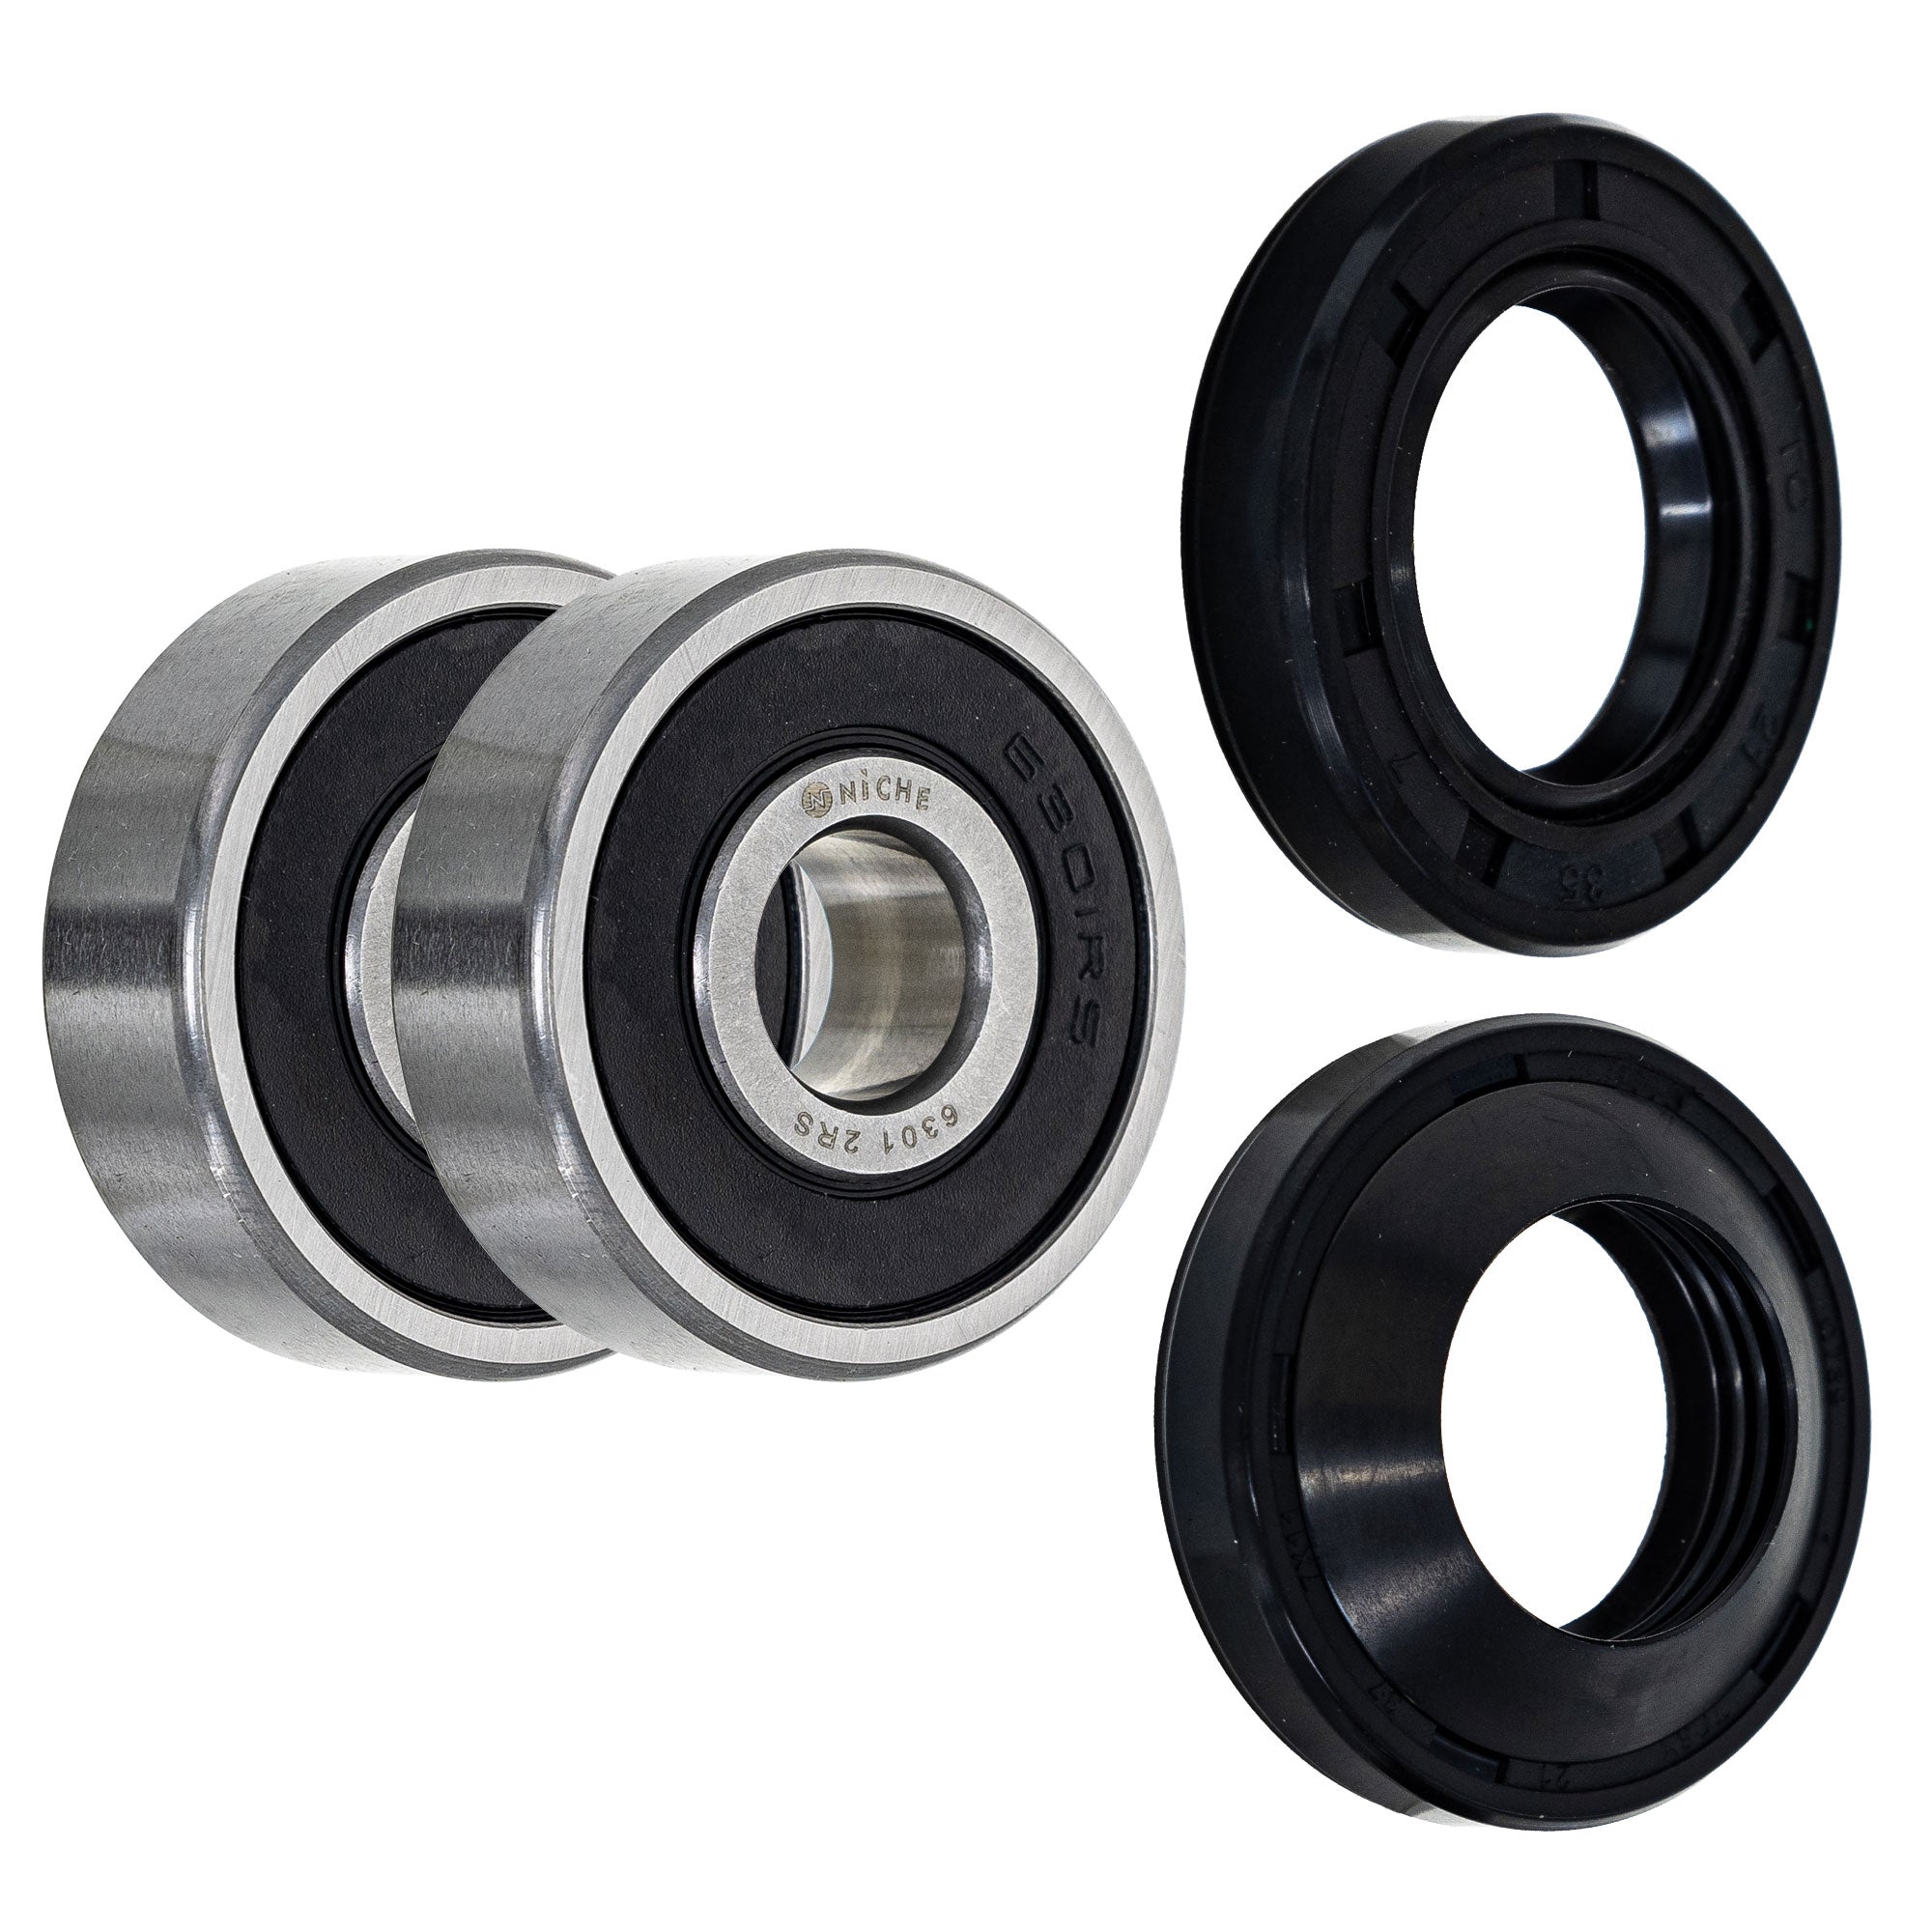 Wheel Bearing Seal Kit for zOTHER XL100S Trials Elsinore NICHE MK1008948